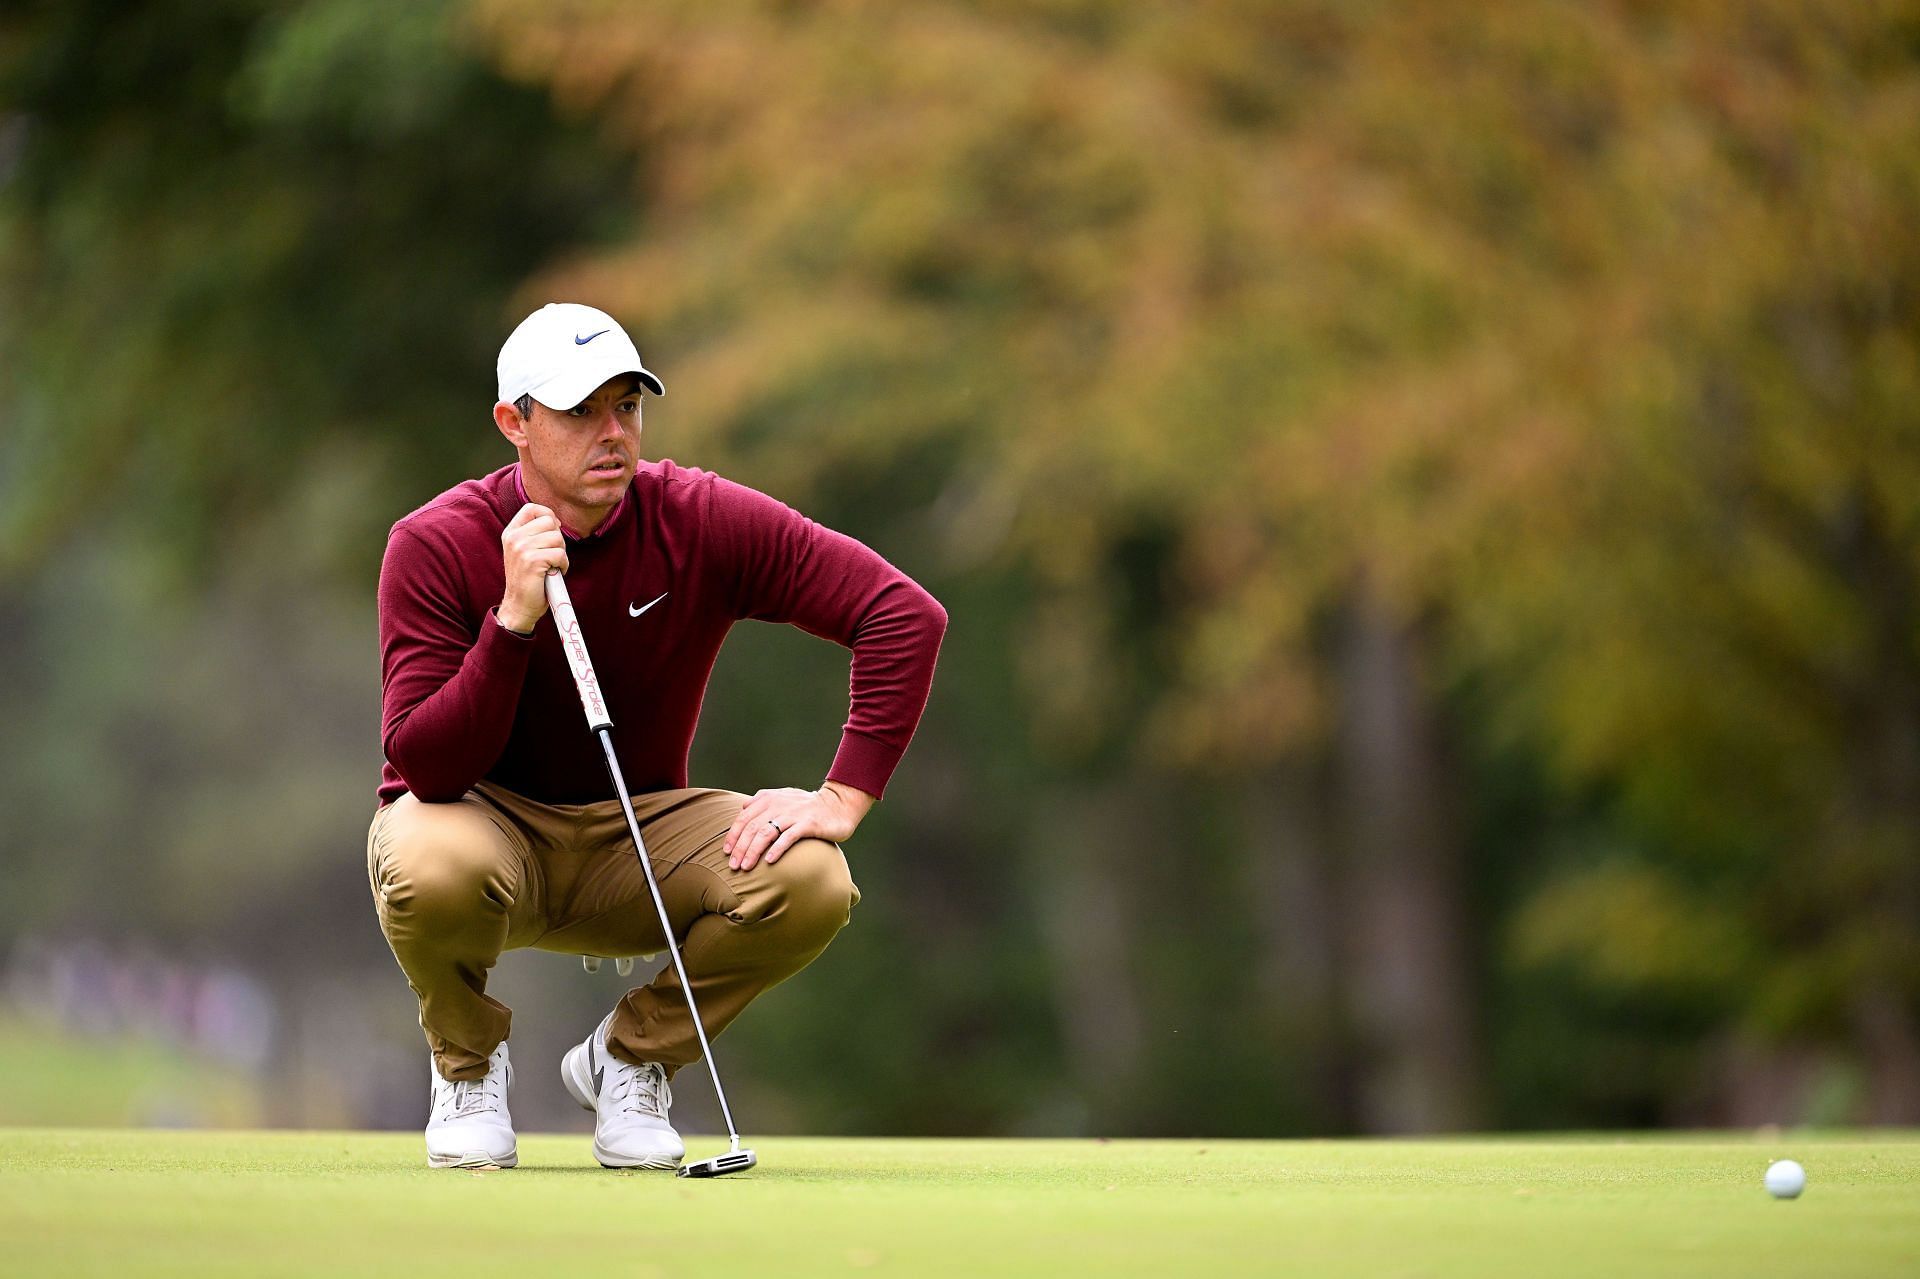 Rory McIlroy at the 2023 BMW PGA Championship - Day Four (Image via Getty)